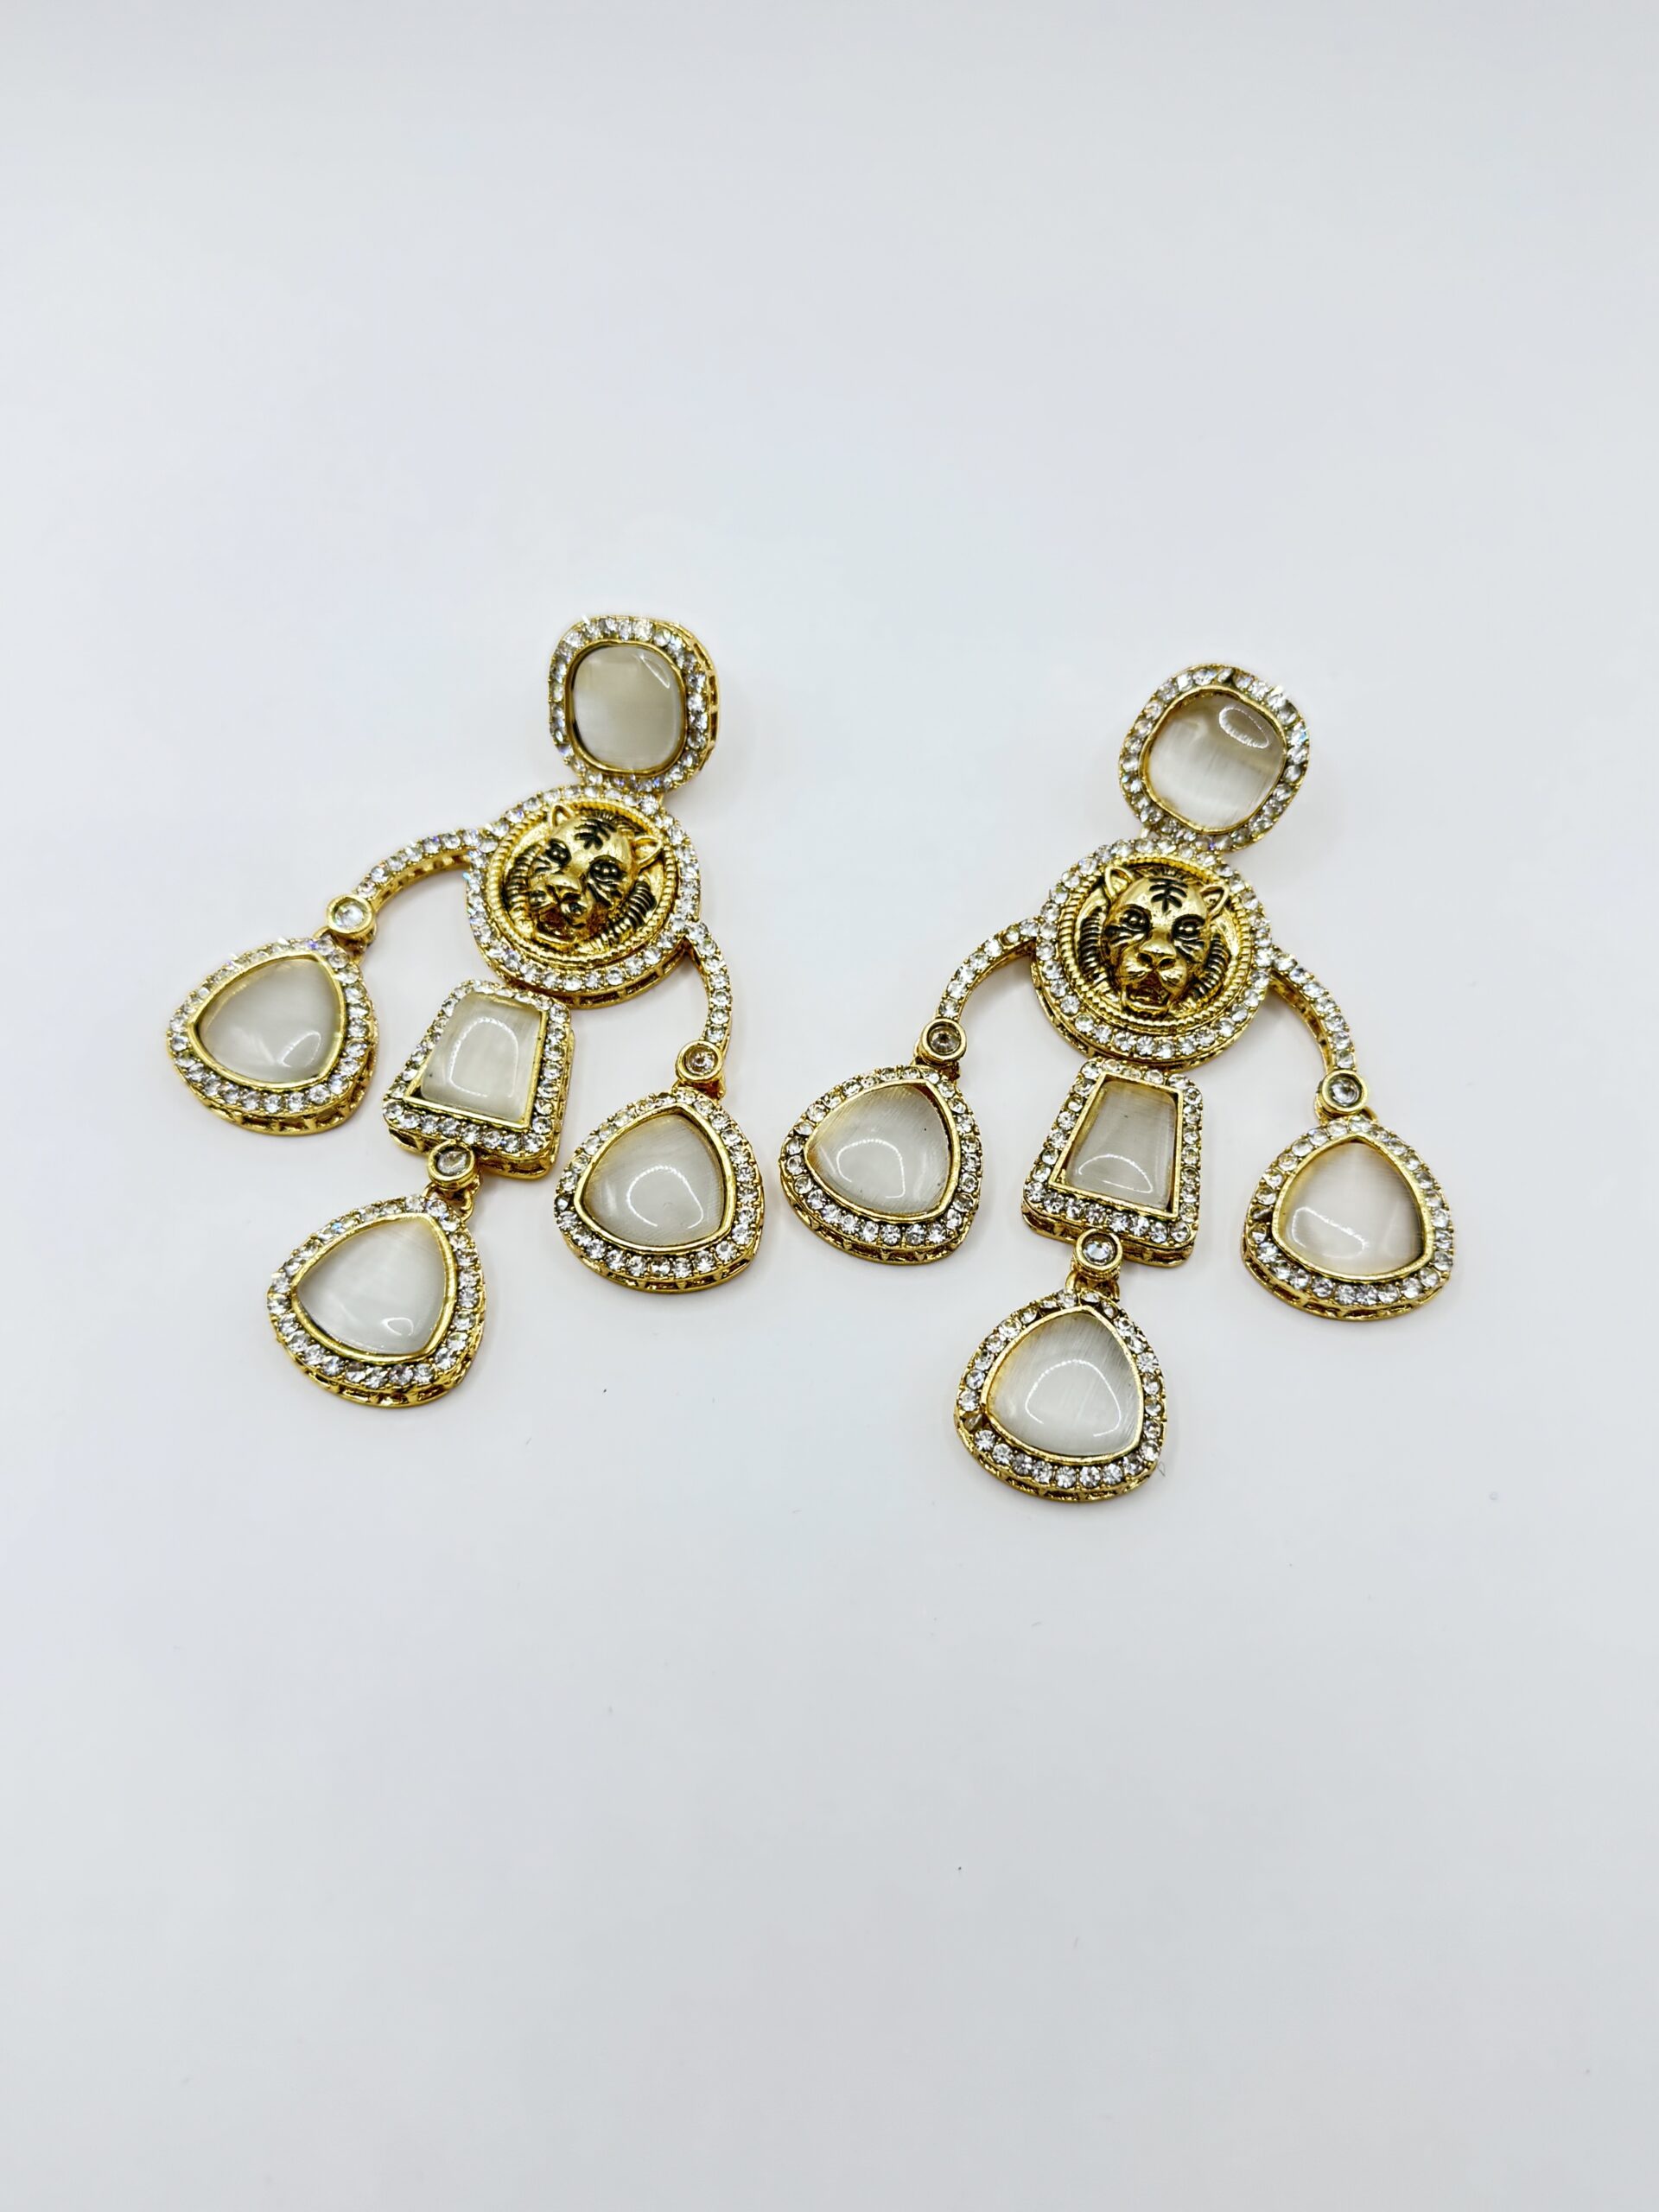 Vintage Monet Faux Pearl Crystal Clip on Earrings Oval Rope Detailing Gold  Metal Rhinestone Halo Cottage